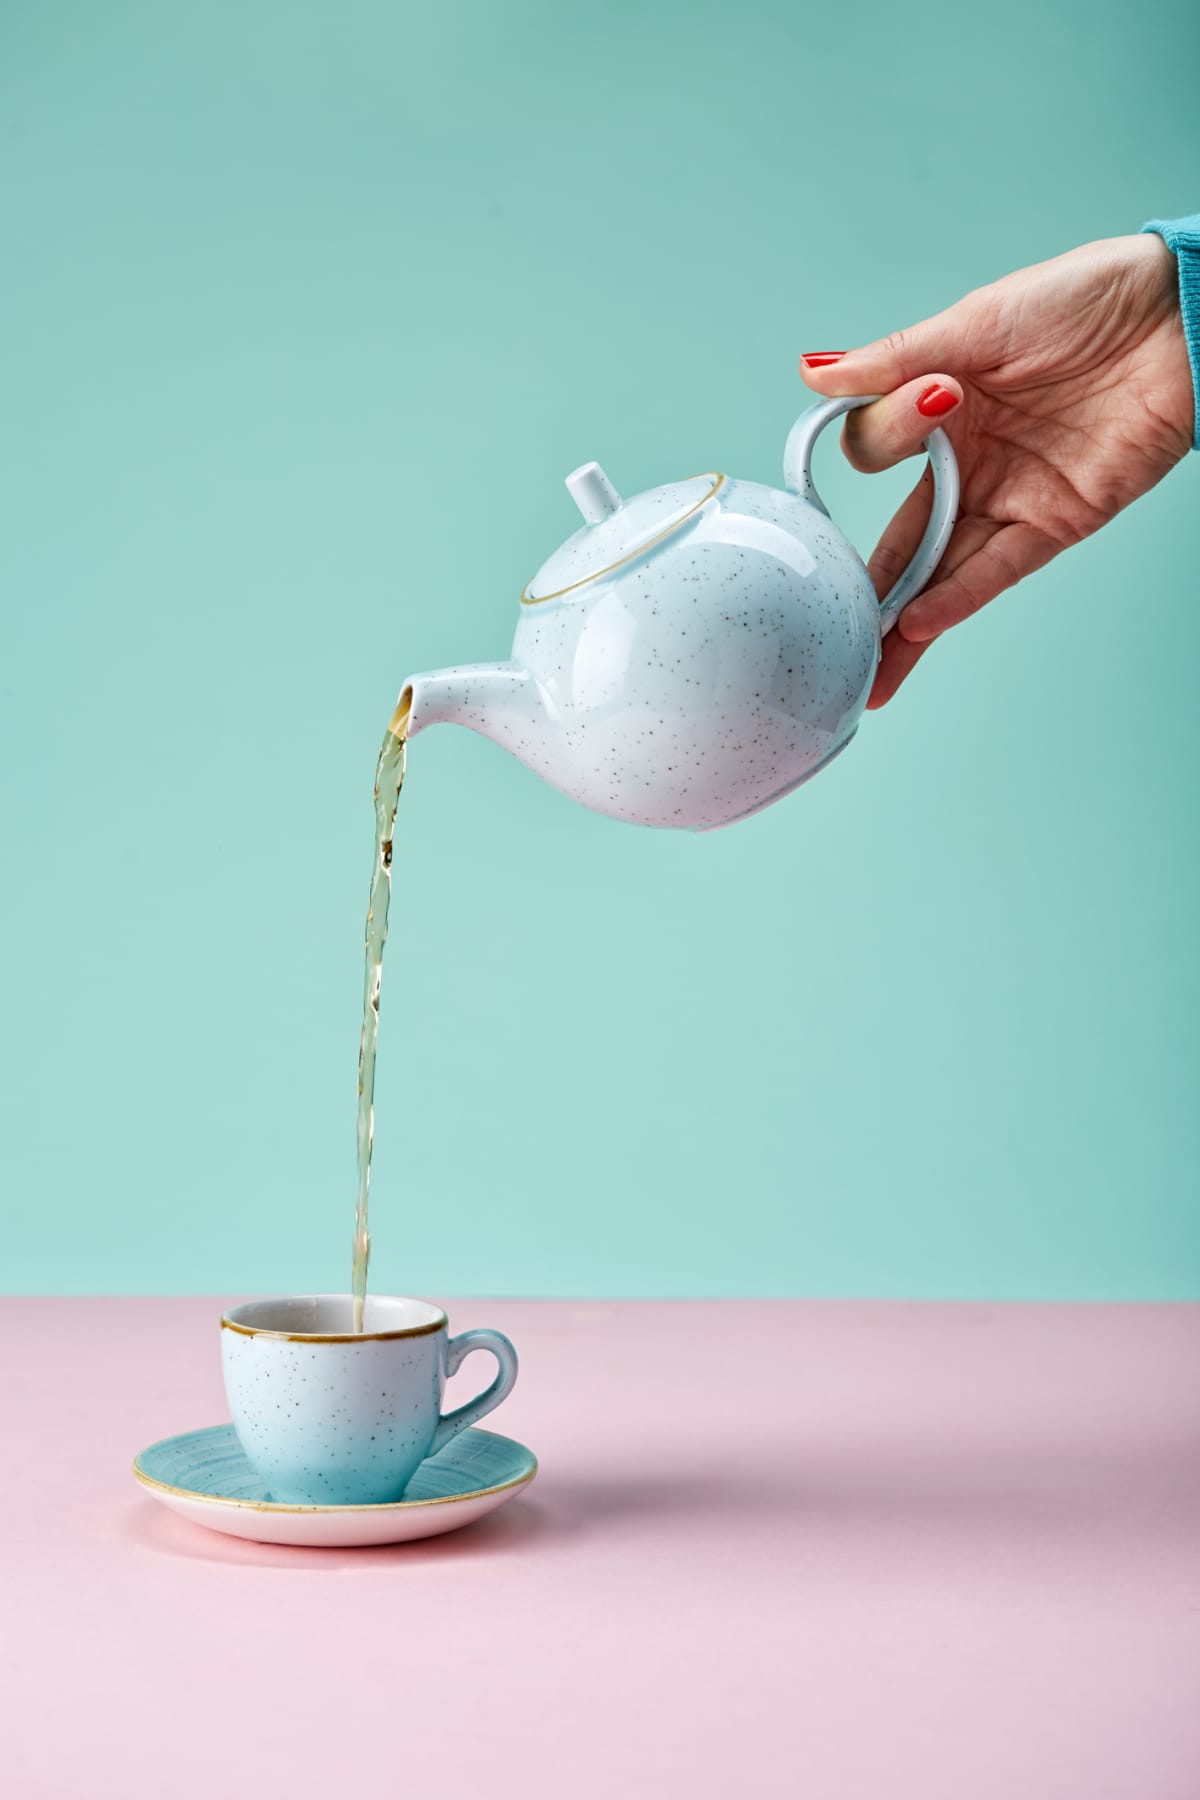 A person pouring tea out of a teapot